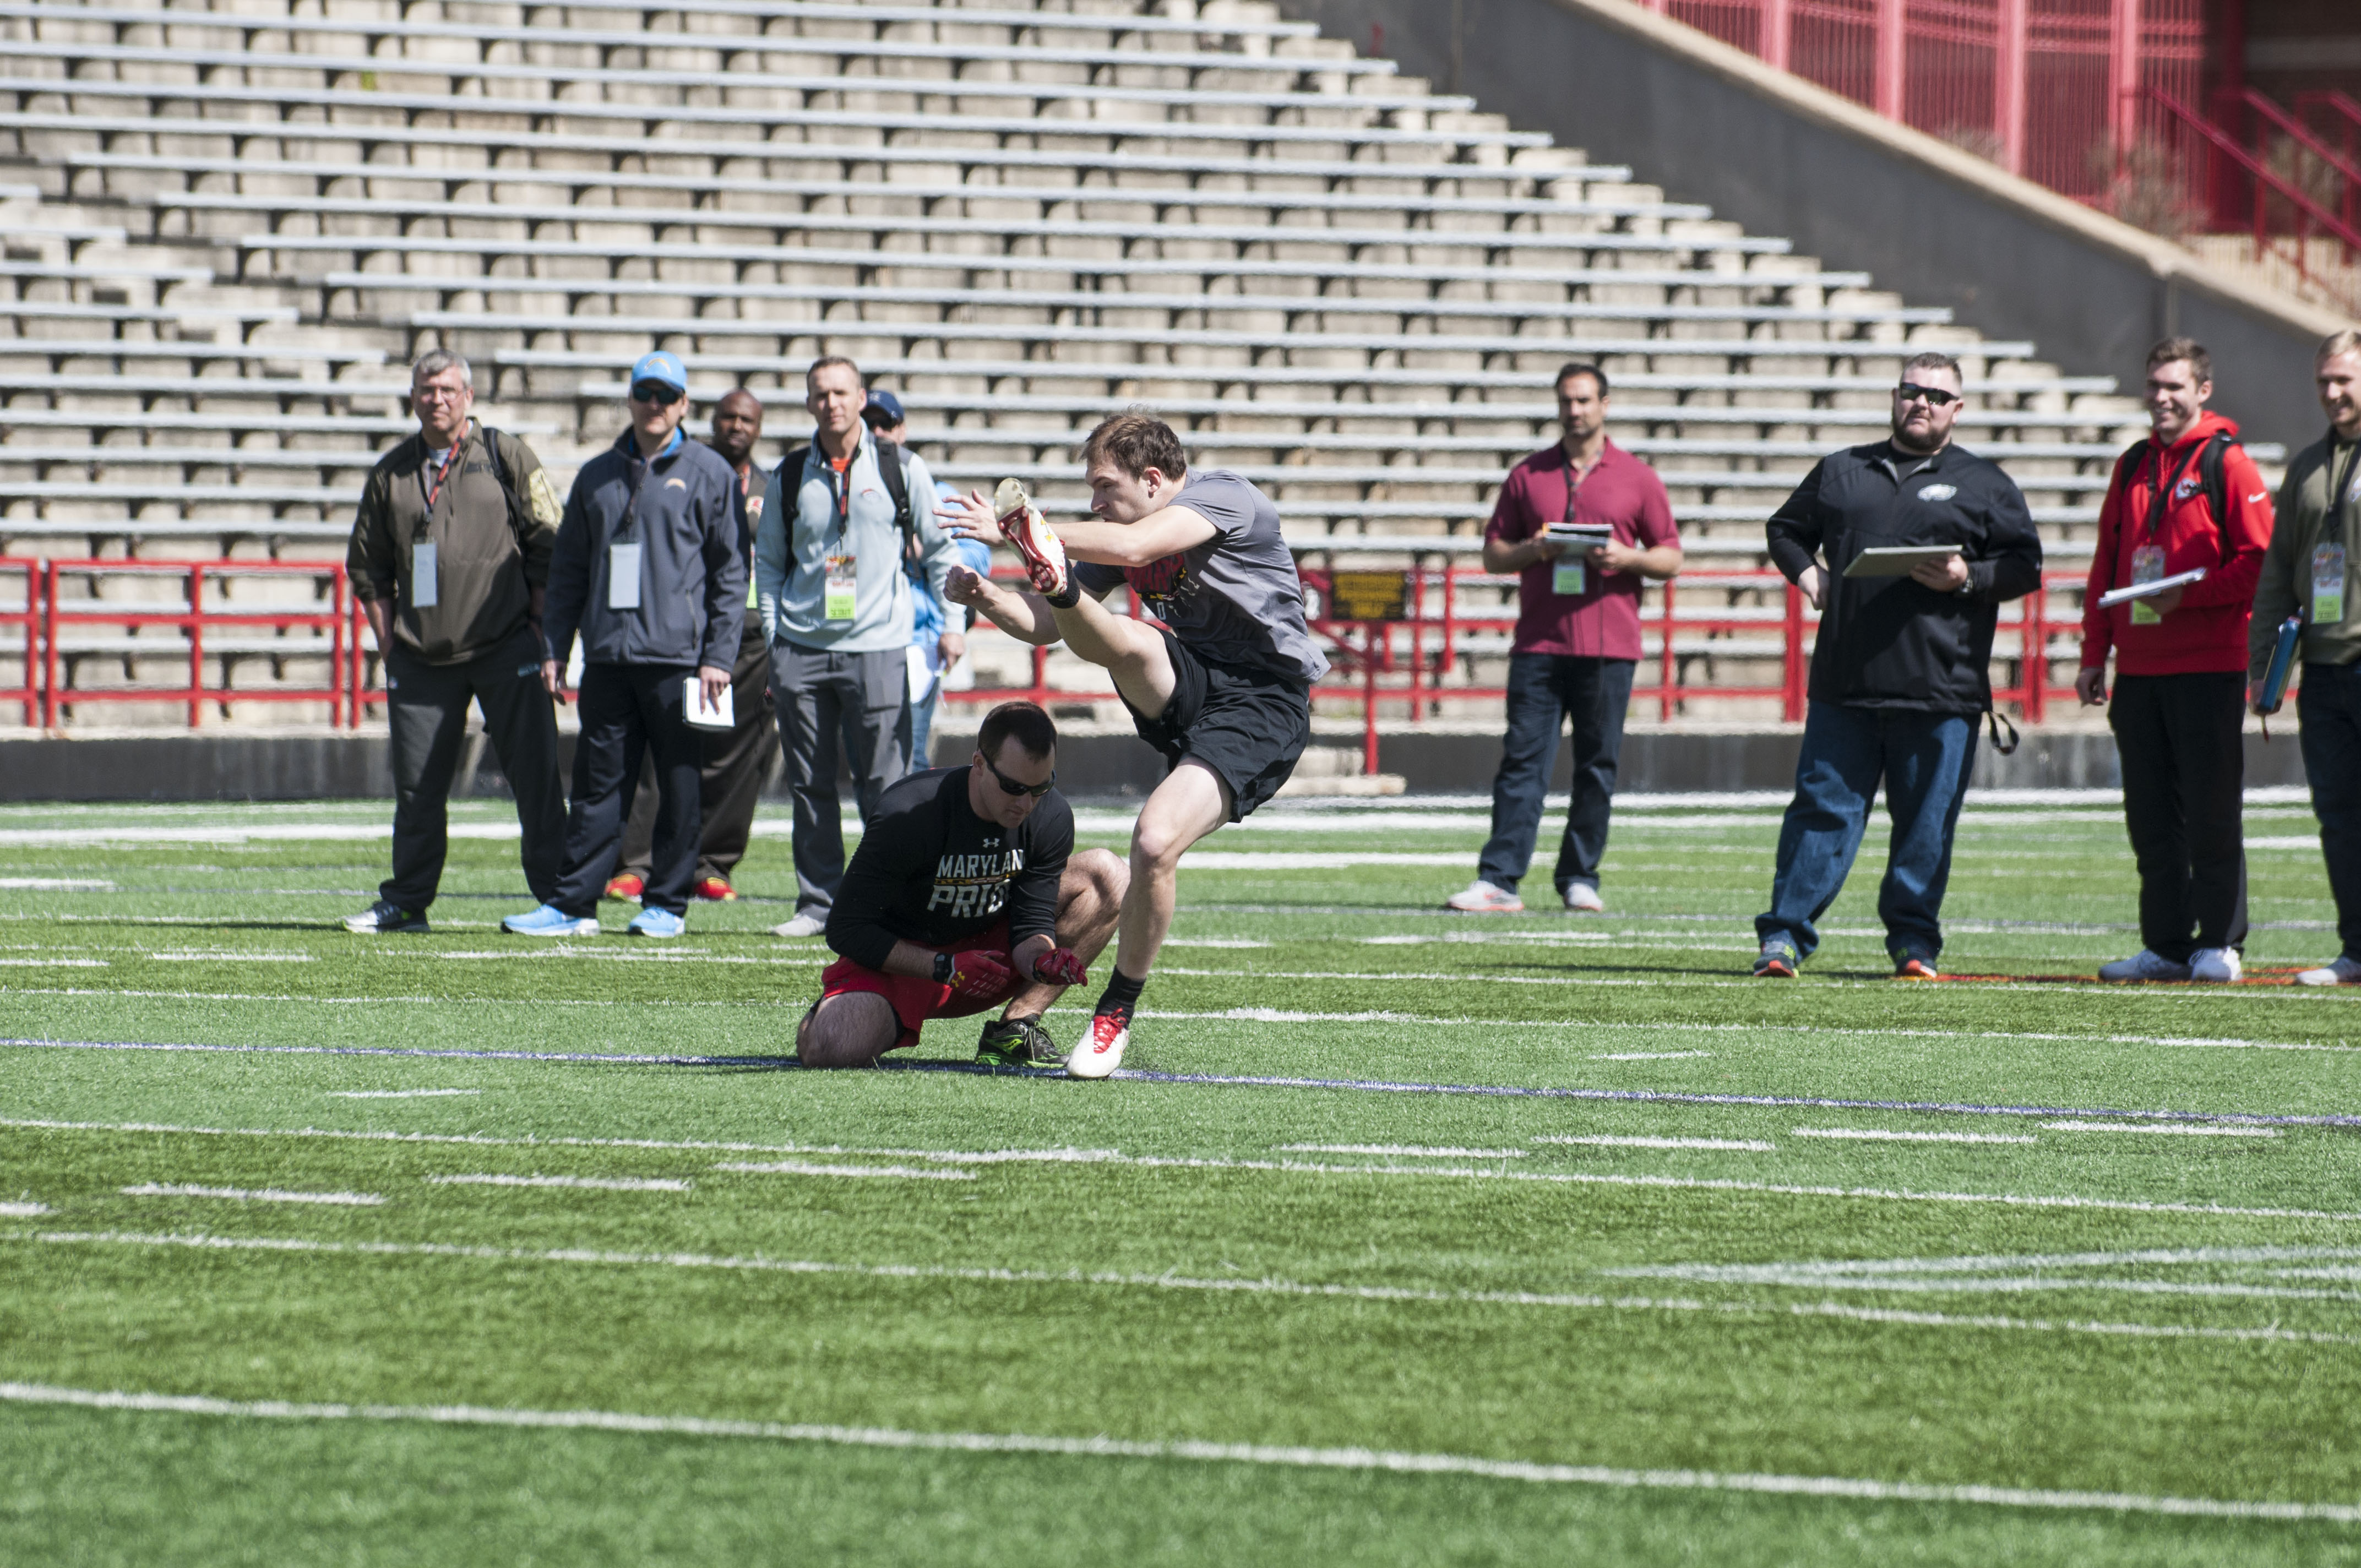 Brad Craddock, place kicker for the Maryland Terrapins, practices kicking field goals for NFL scouts at Maryland Football Pro Day in College Park, Md. at Capital One Field at Maryland Stadium.(Photo courtesy of Rebecca Rainey)